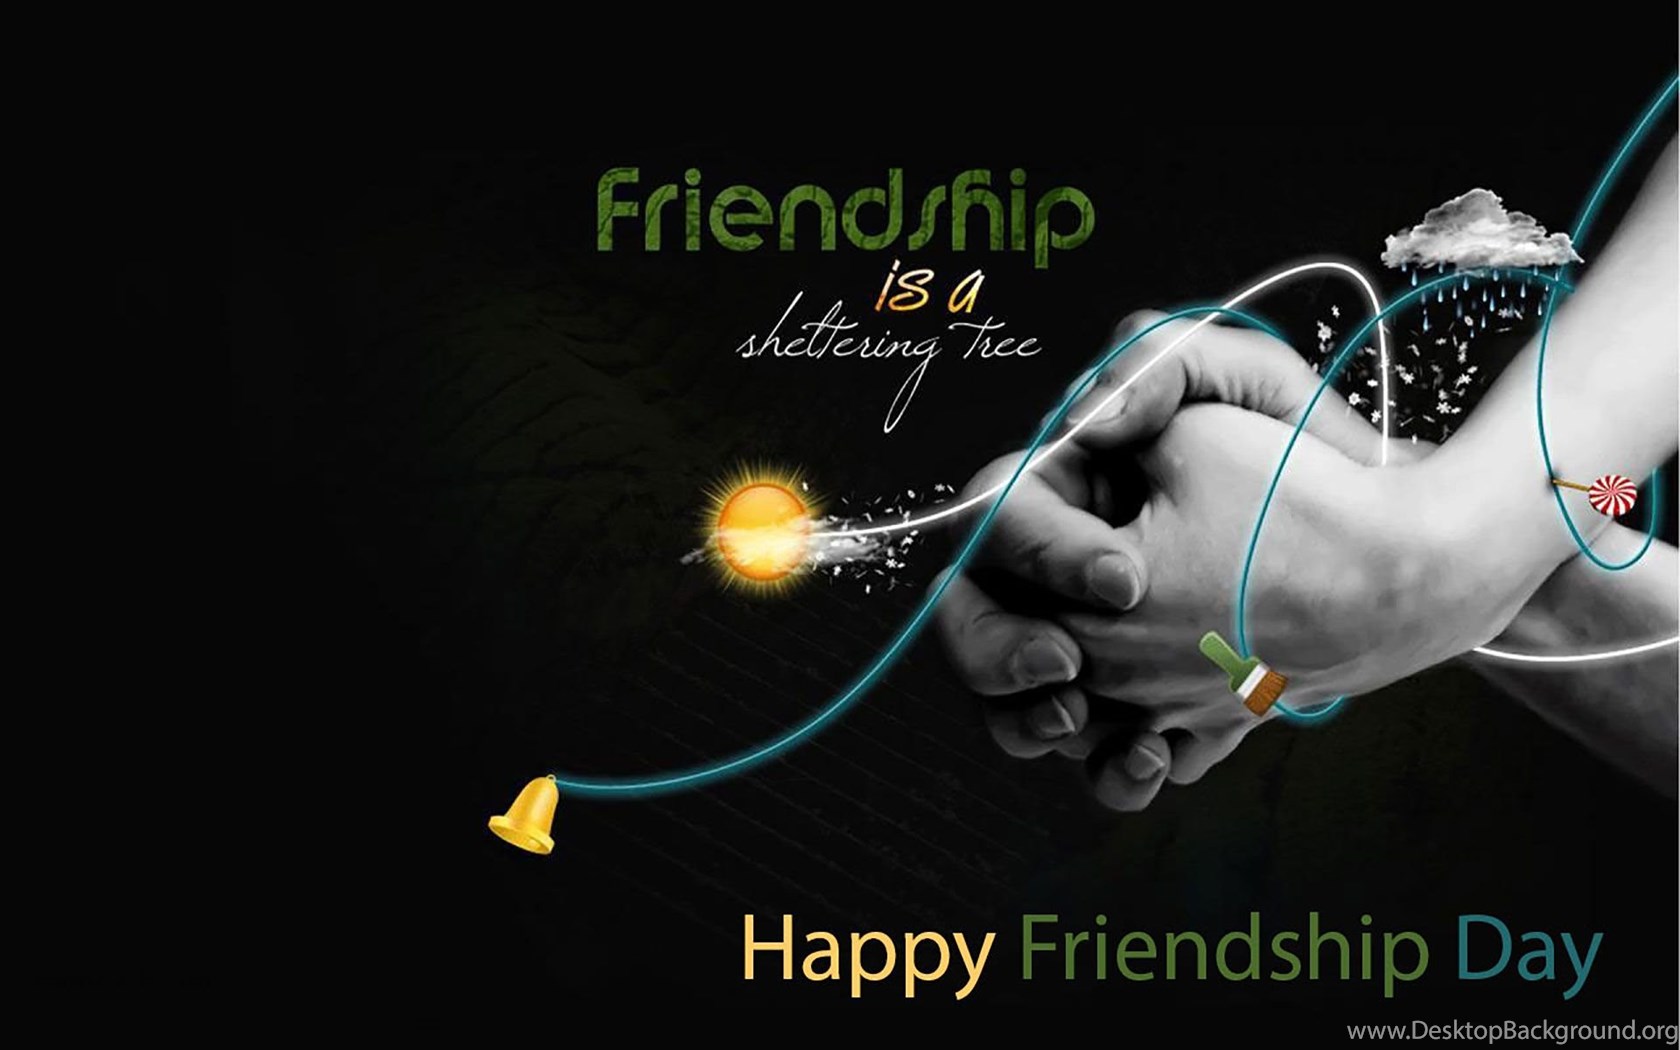 Happy Friendship Day Wallpaper With Quotes Desktop Background